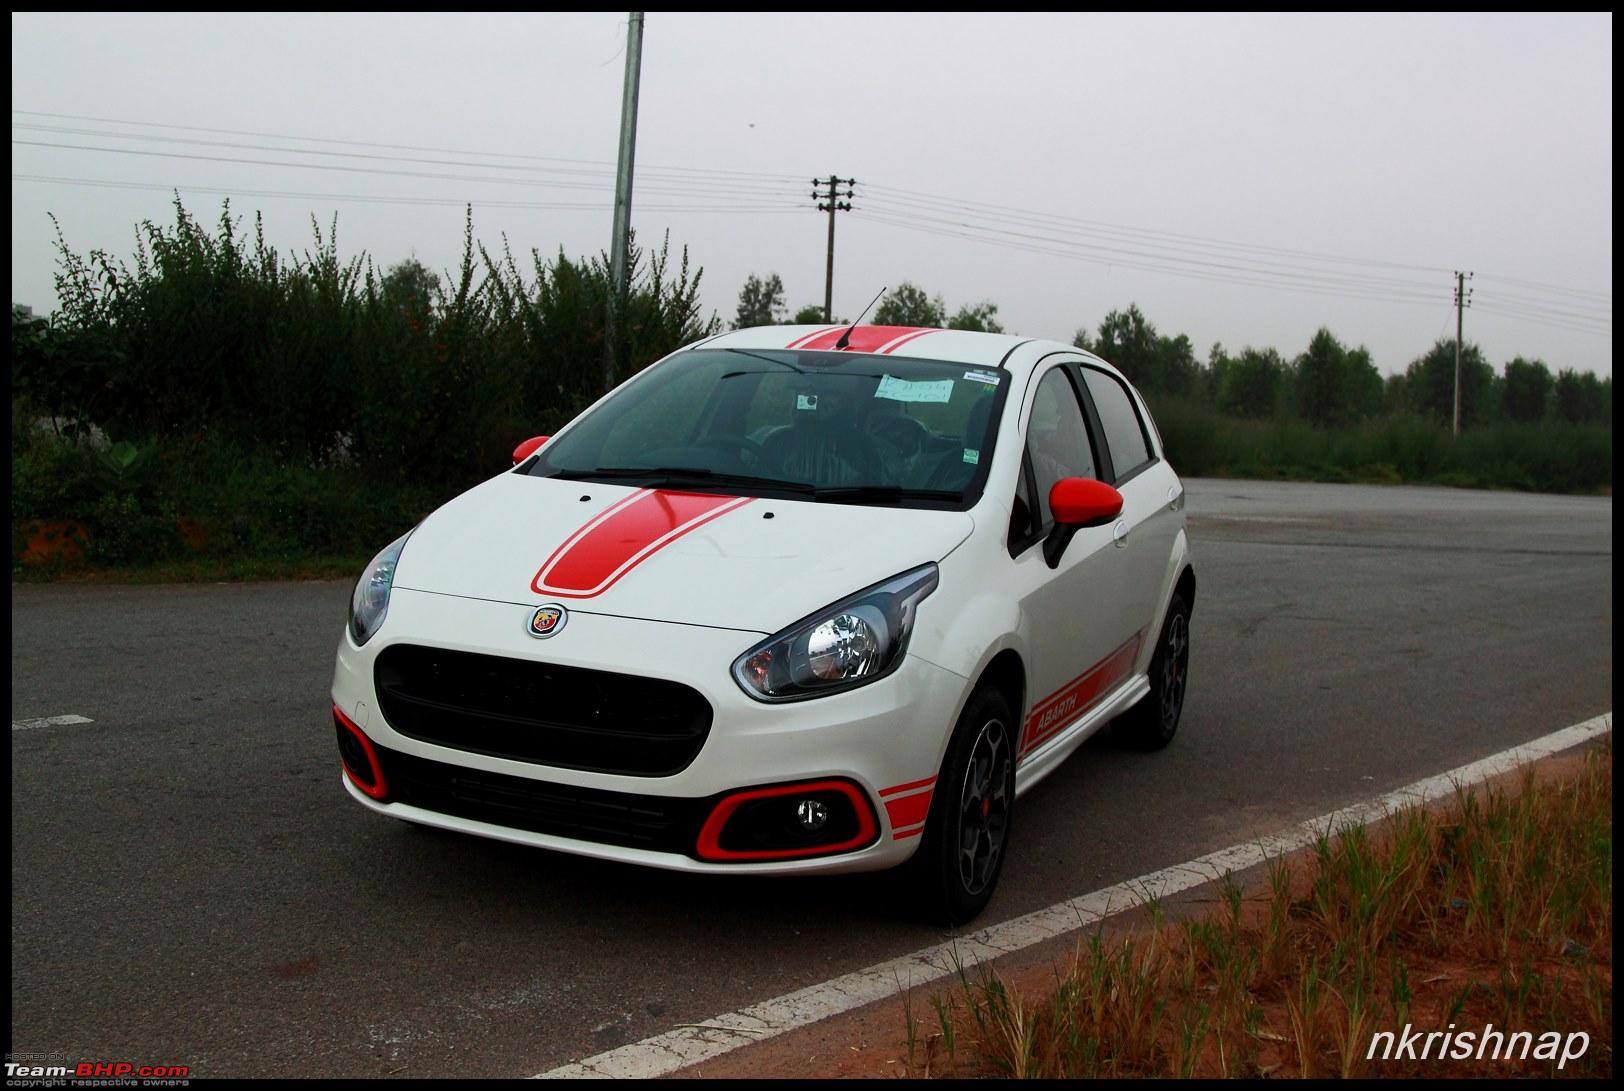 Fiat Abarth Punto - Test Drive & Review - Team-BHP